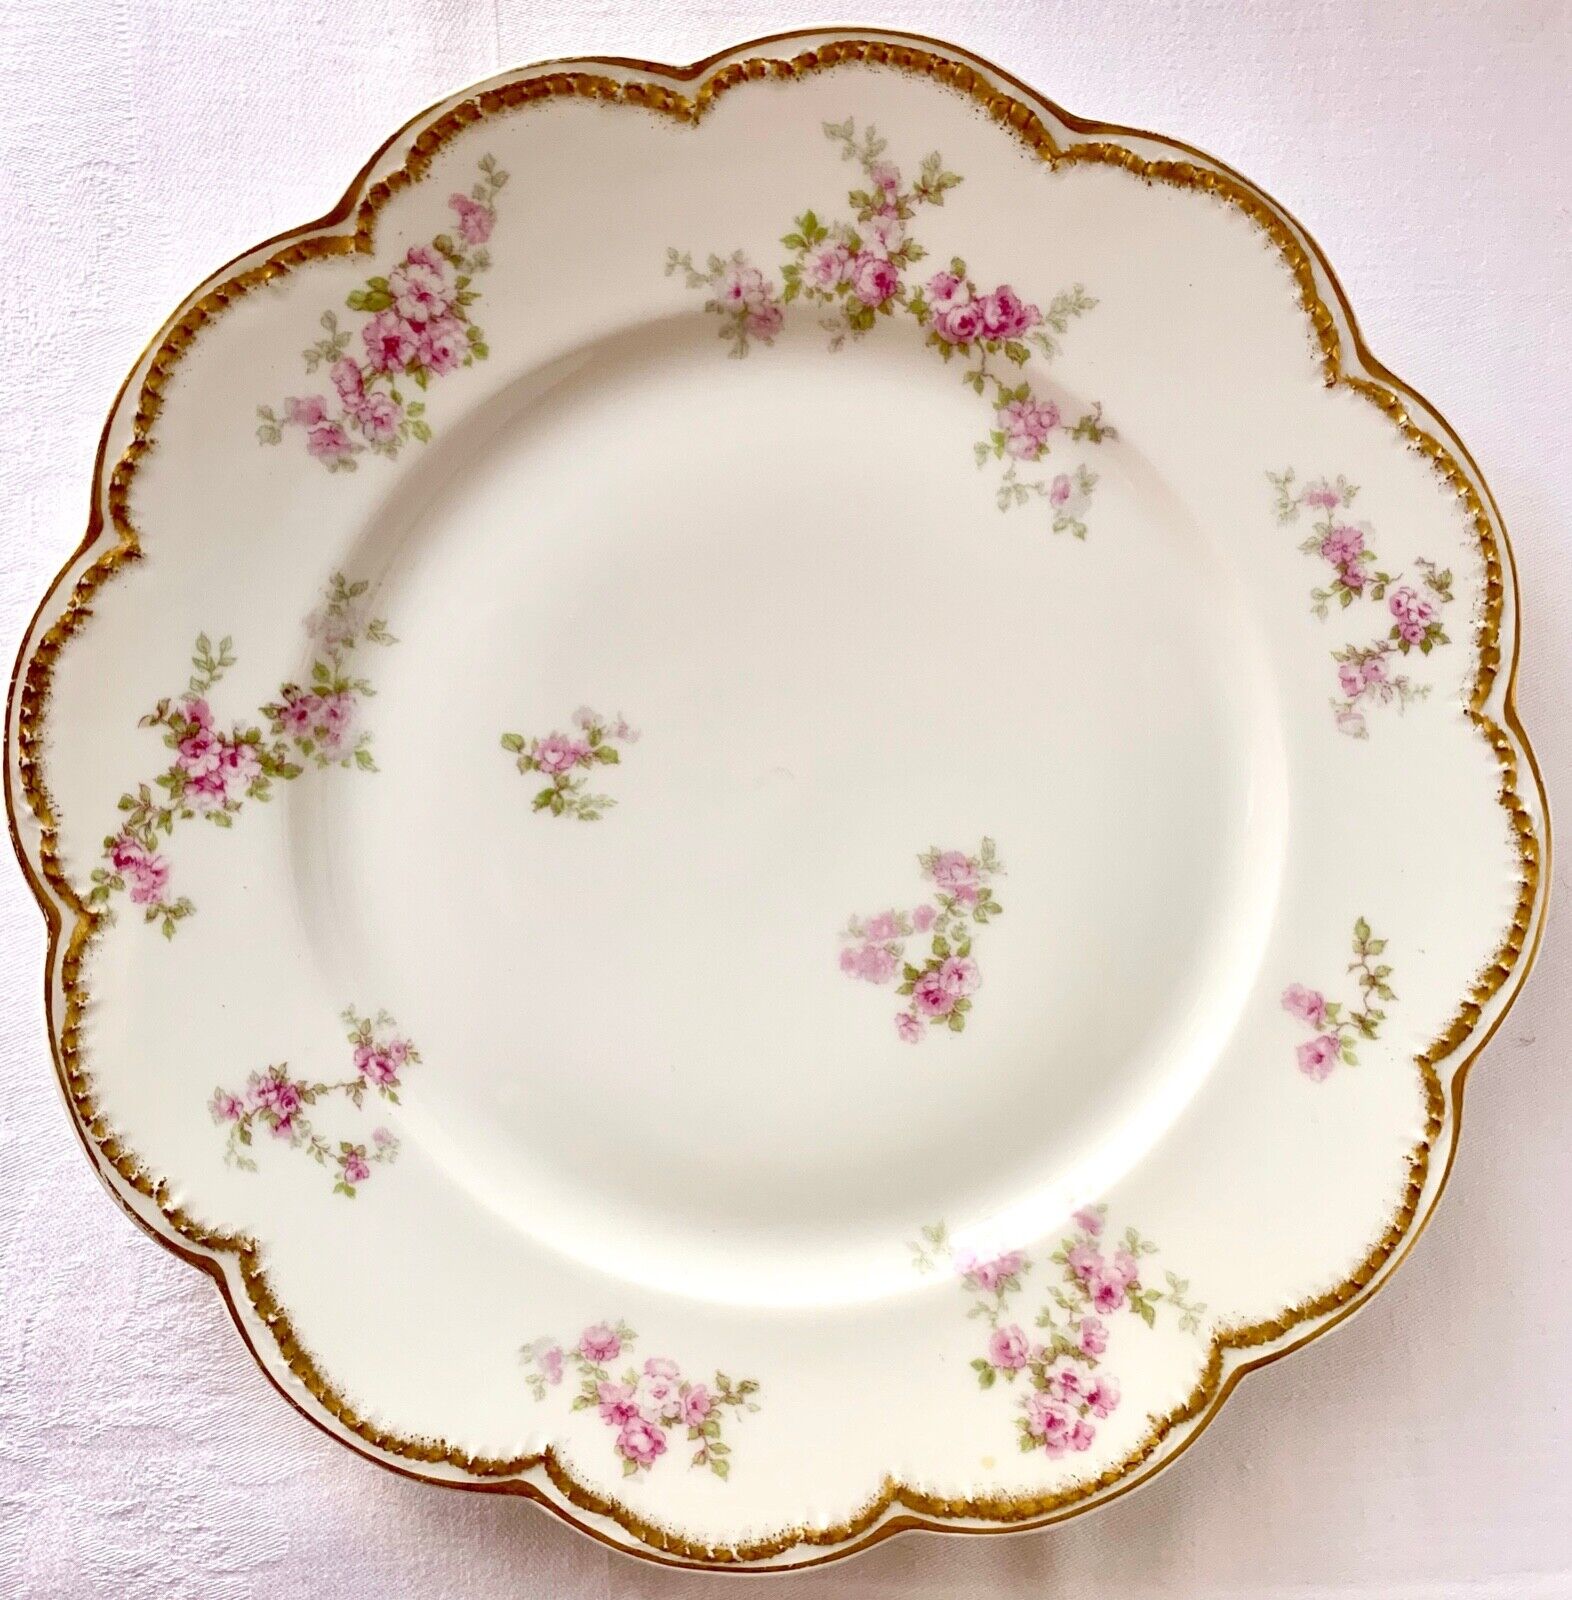 THEODORE HAVILAND LIMOGES DOUBLE GOLD DINNER PLATE, PINK ROSES, BLANK 11